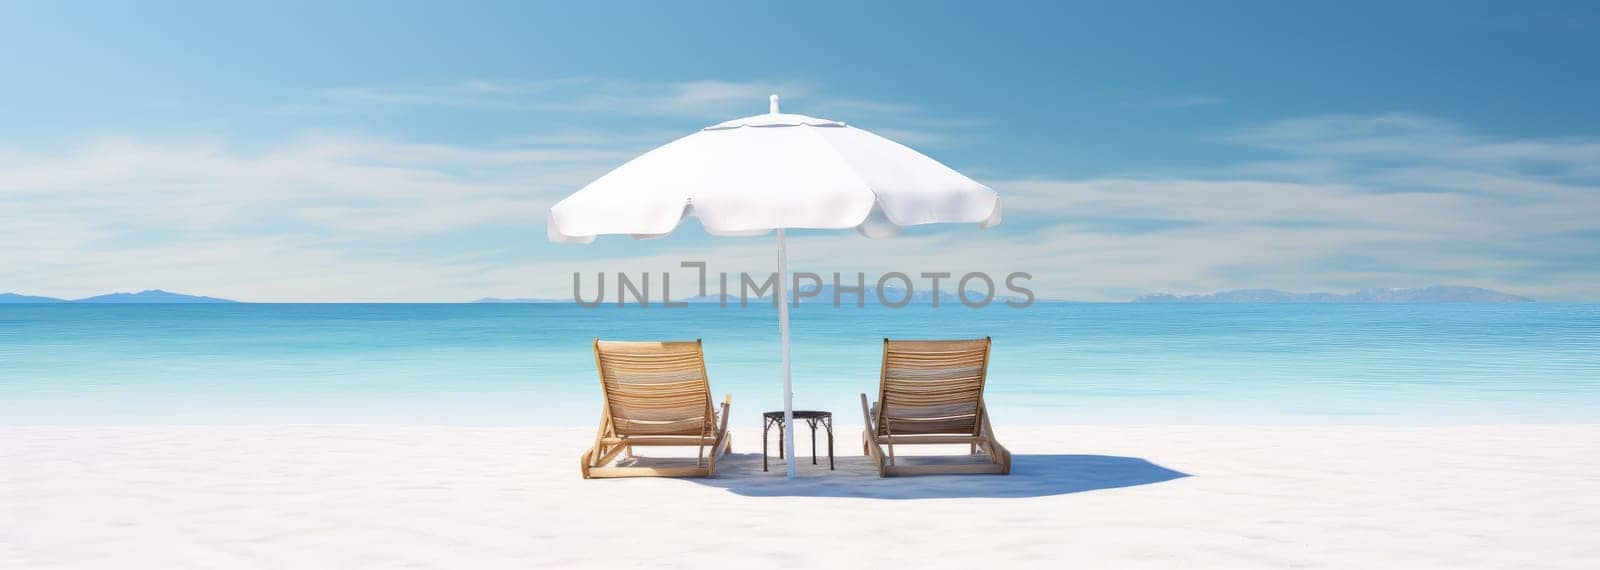 Two sun loungers under a large summer umbrella on a sandy beach by the sea